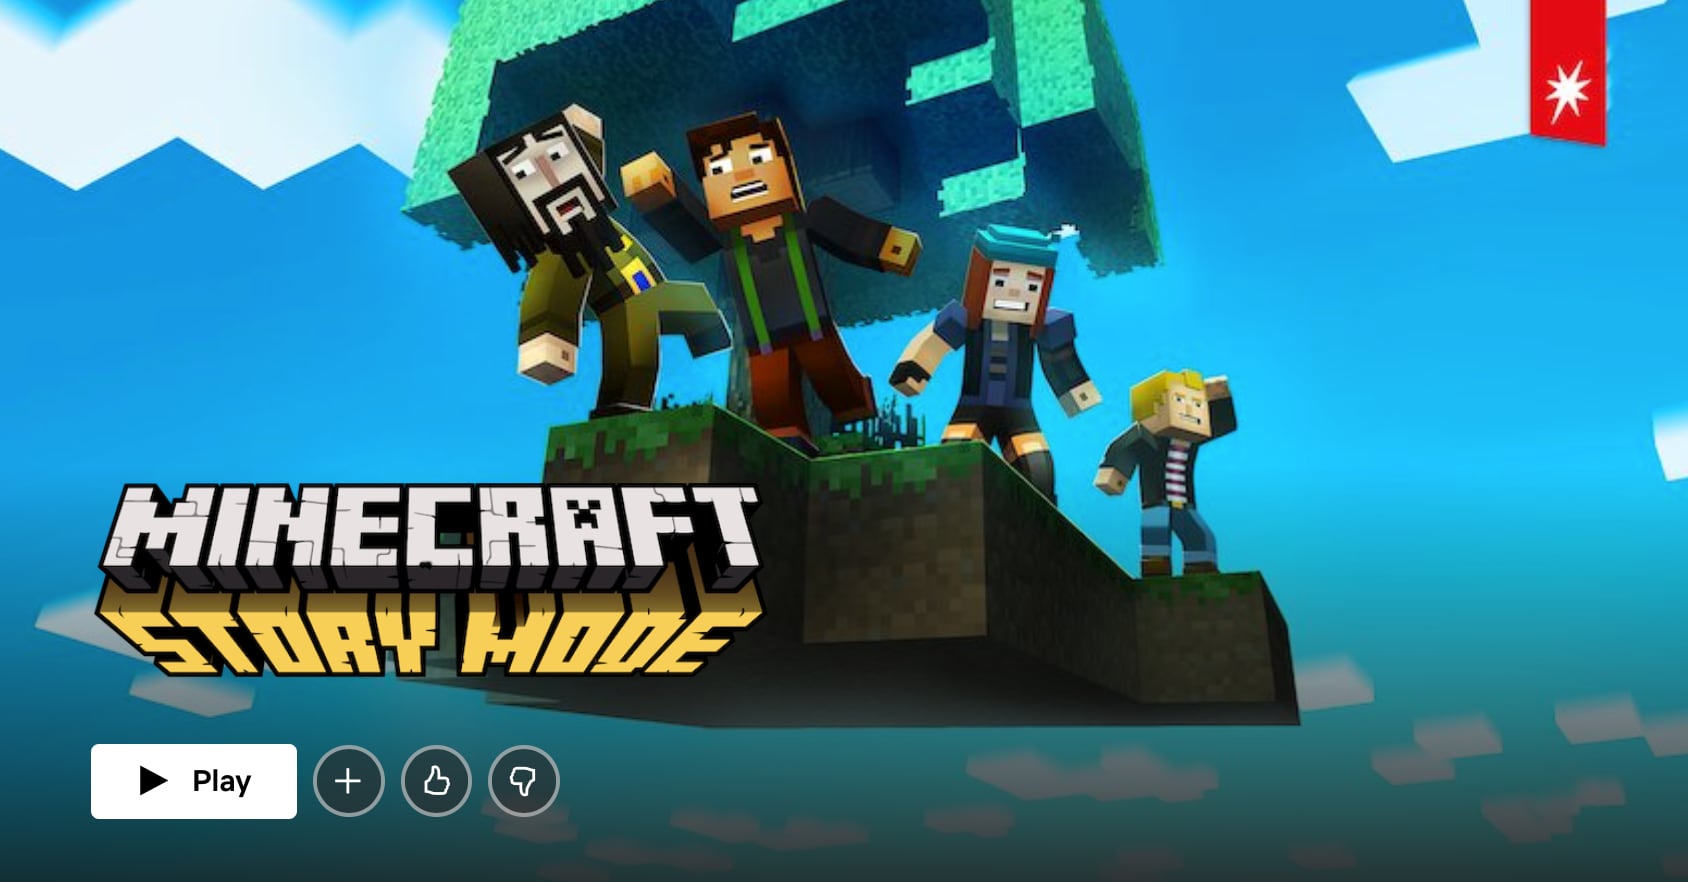 Minecraft: Story Mode' game coming to Netflix as interactive series review  - FlatpanelsHD